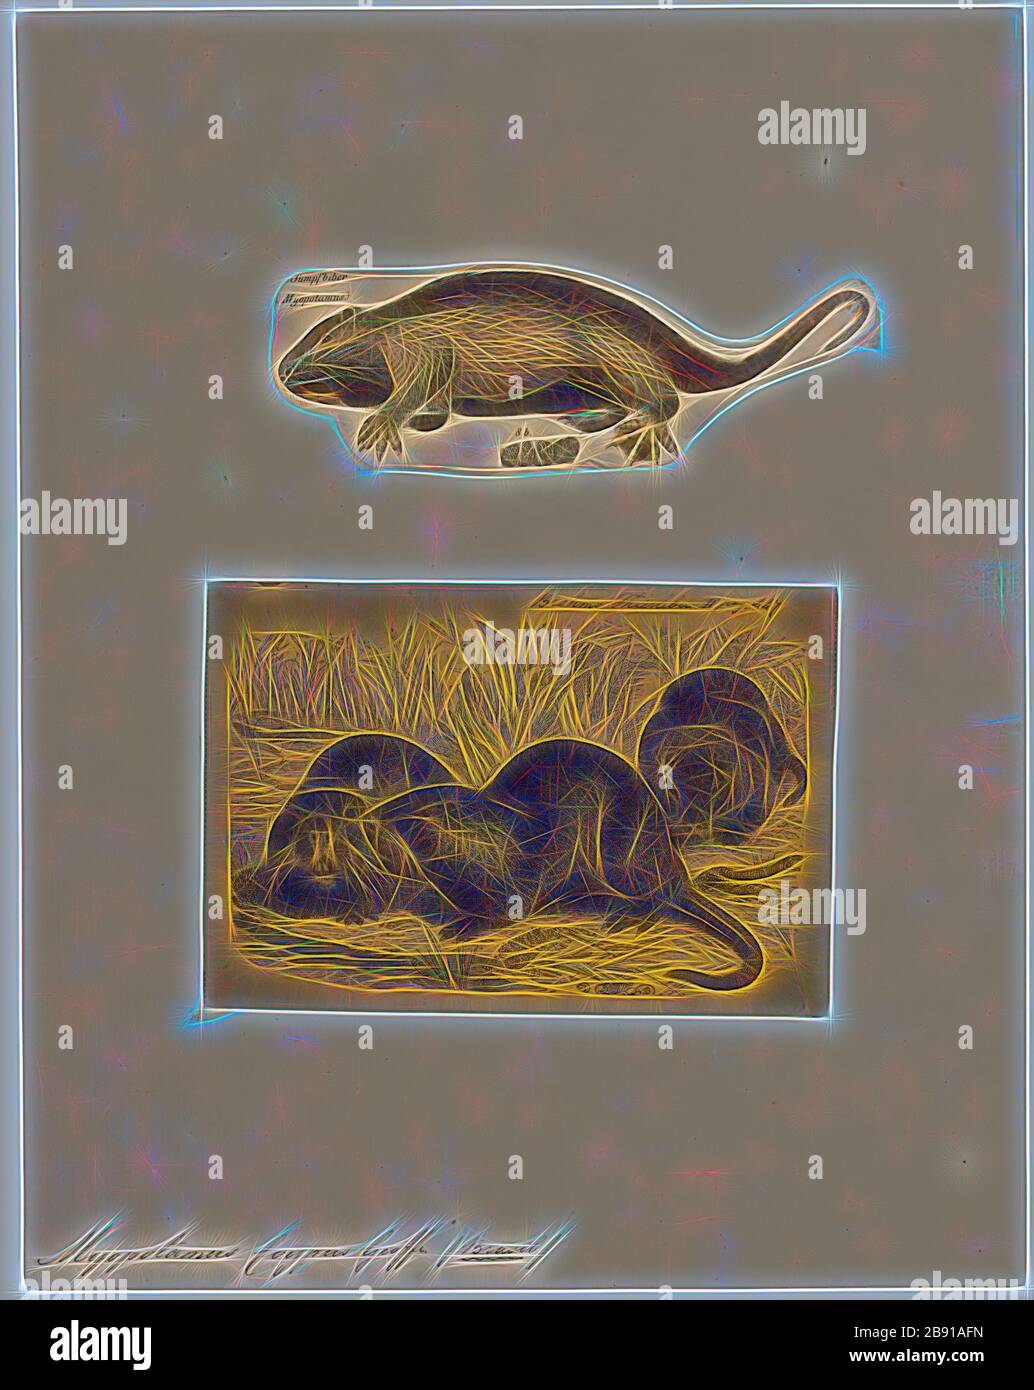 Myopotamus coypus, Print, The coypu, also known as the nutria, is a large, herbivorous, semiaquatic rodent. Classified for a long time as the only member of the family Myocastoridae. Myocastor is actually nested within Echimyidae, the family of the spiny rats. The coypu lives in burrows alongside stretches of water, and feeds on river plant stems. Originally native to subtropical and temperate South America, it has since been introduced to North America, Europe, Asia, and Africa, primarily by fur farmers. Although it is still hunted and trapped for its fur in some regions, its destructive burr Stock Photo